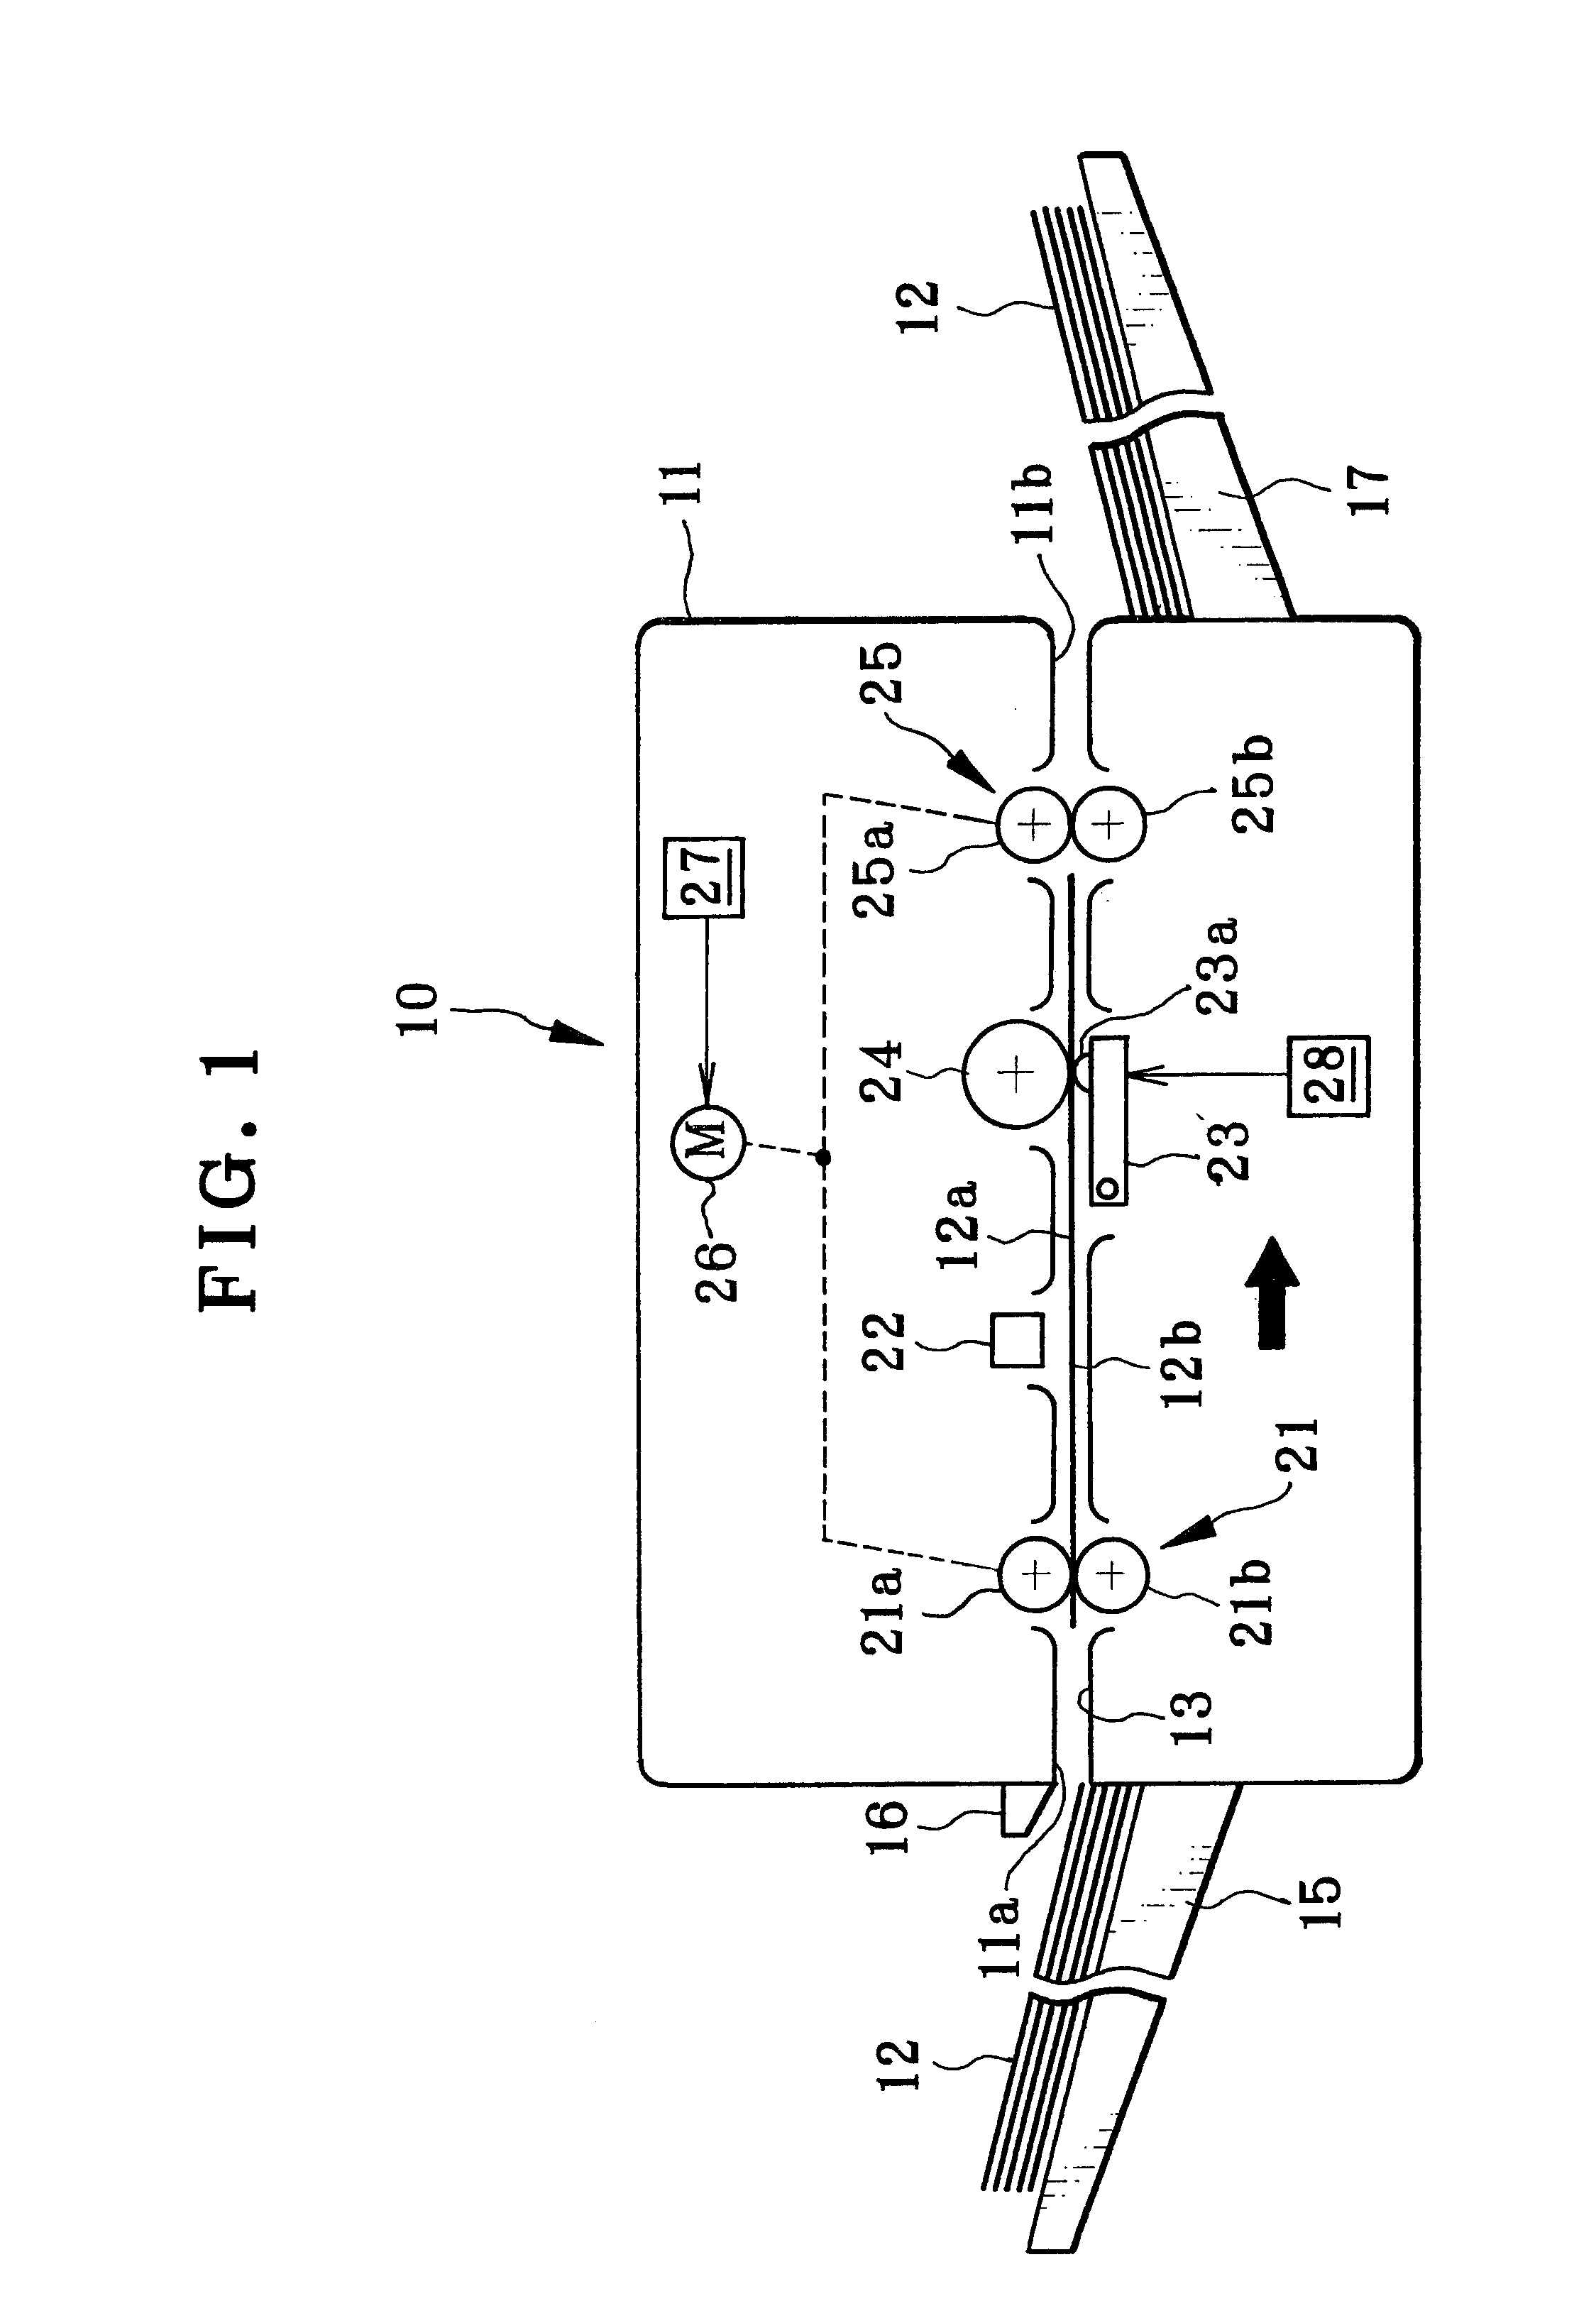 Printer and printing method capable of double-sided printing